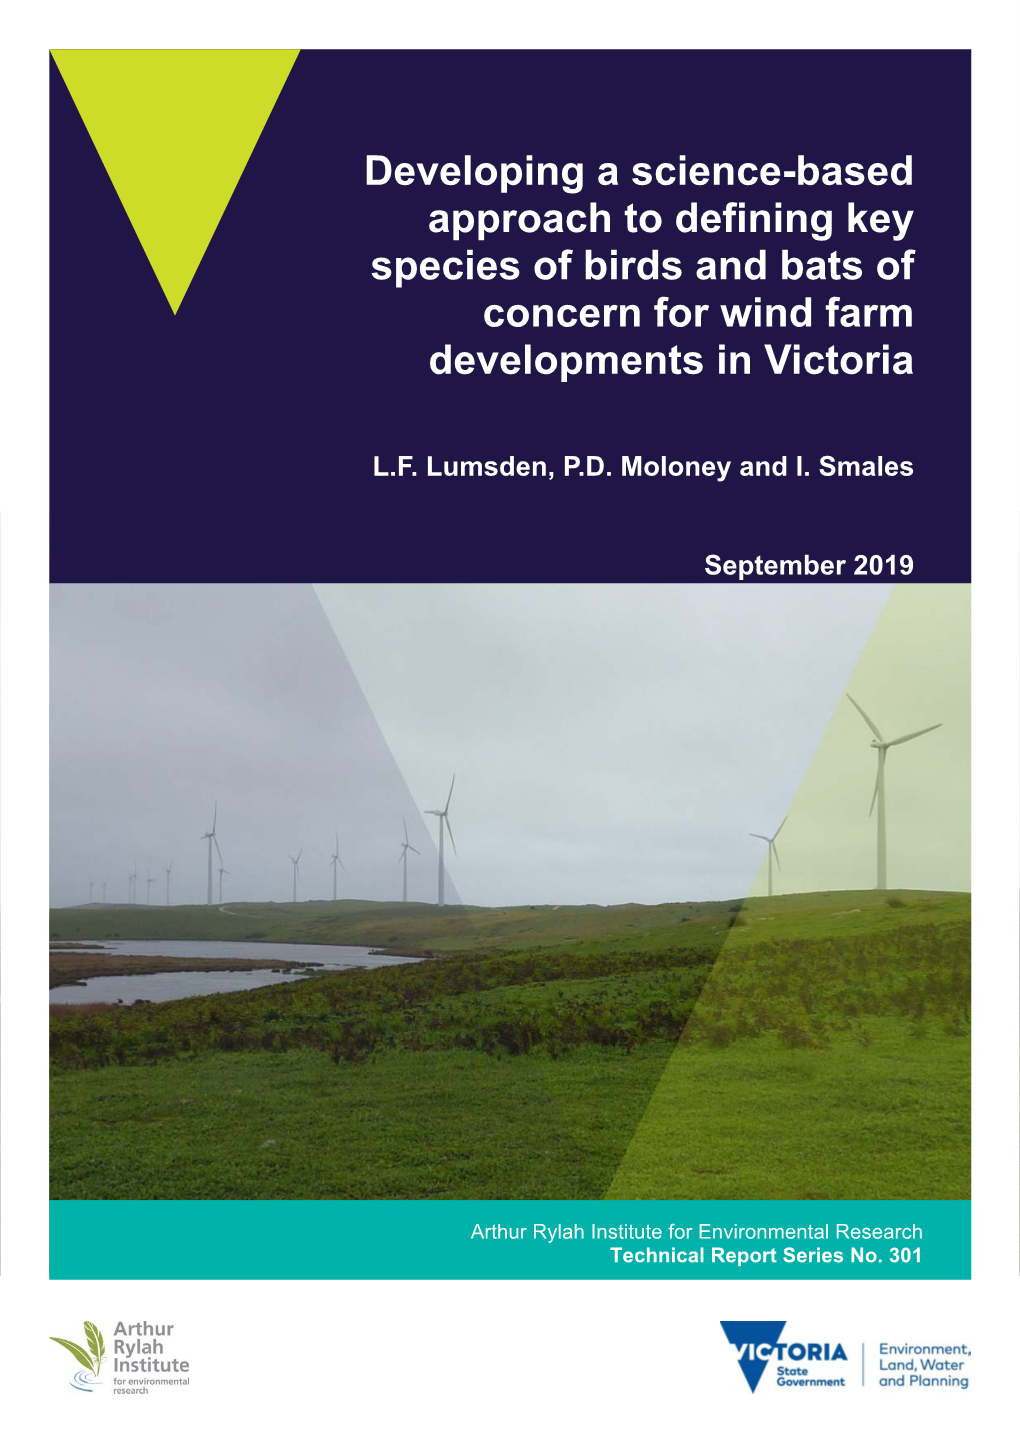 Developing a Science-Based Approach to Defining Key Species of Birds and Bats of Concern for Wind Farm Developments in Victoria